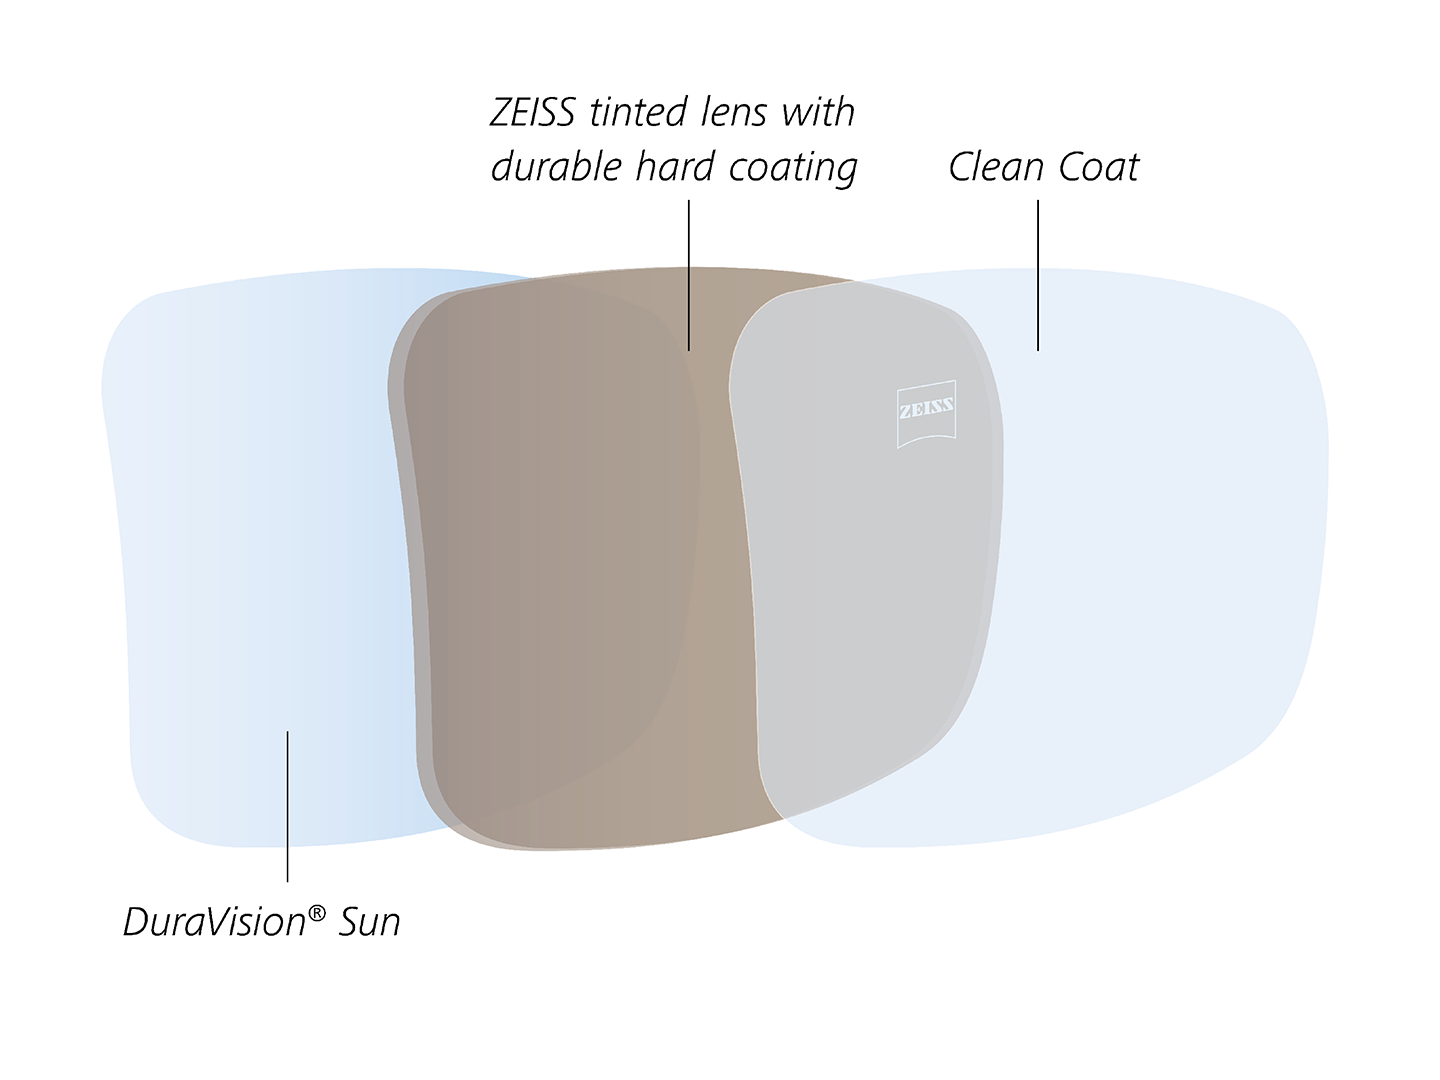 Illustration of back-surface anti-reflective with water and oil repellent properties developed specially for tinted lenses 